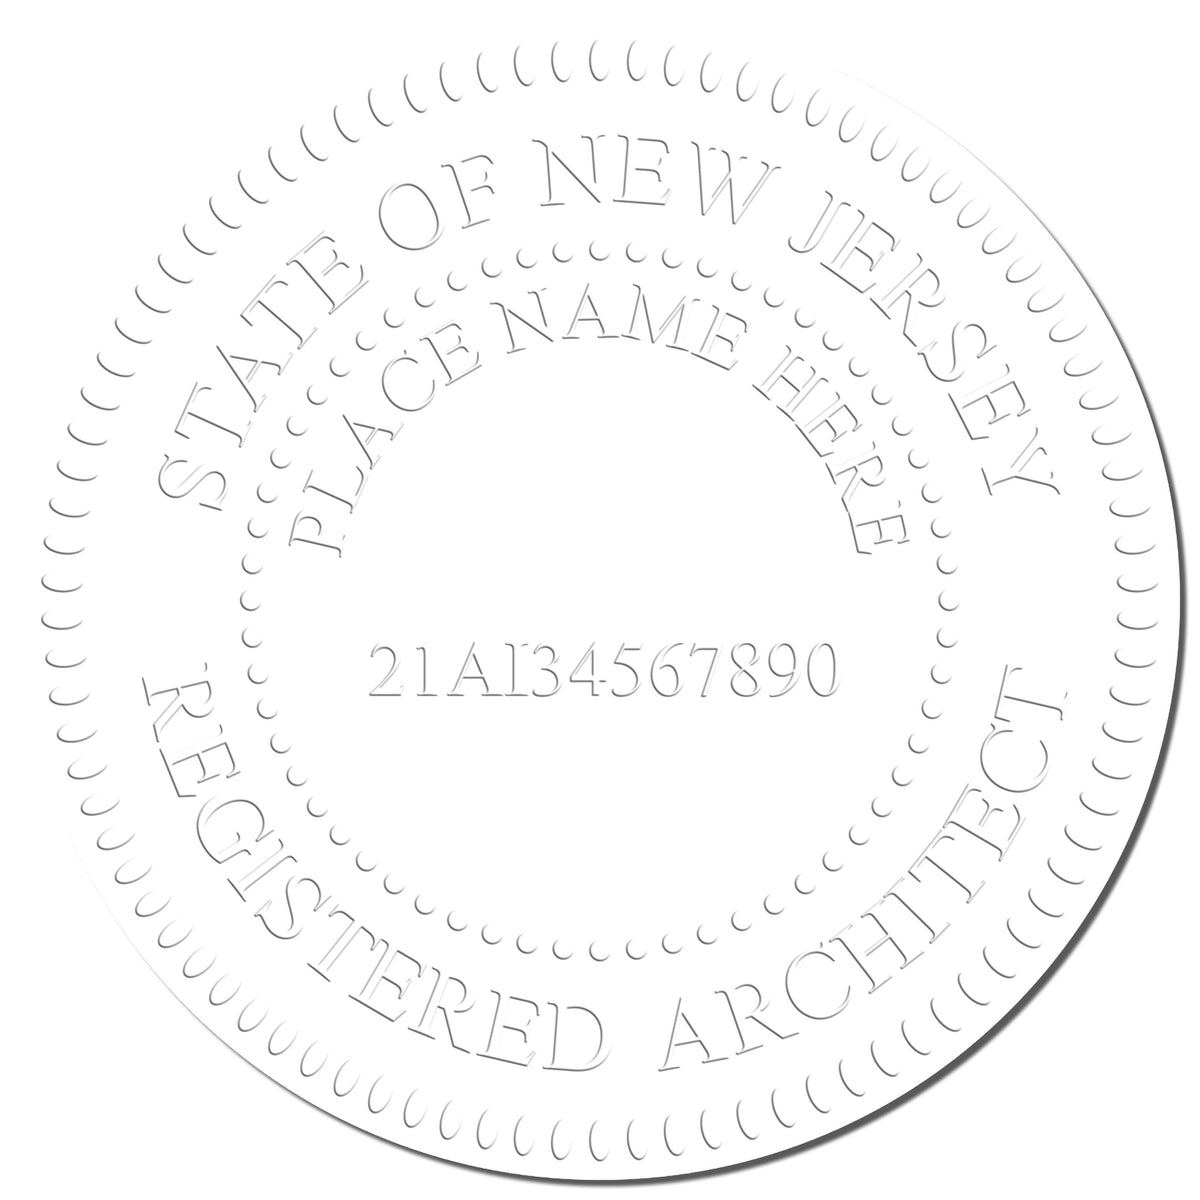 A photograph of the New Jersey Desk Architect Embossing Seal stamp impression reveals a vivid, professional image of the on paper.